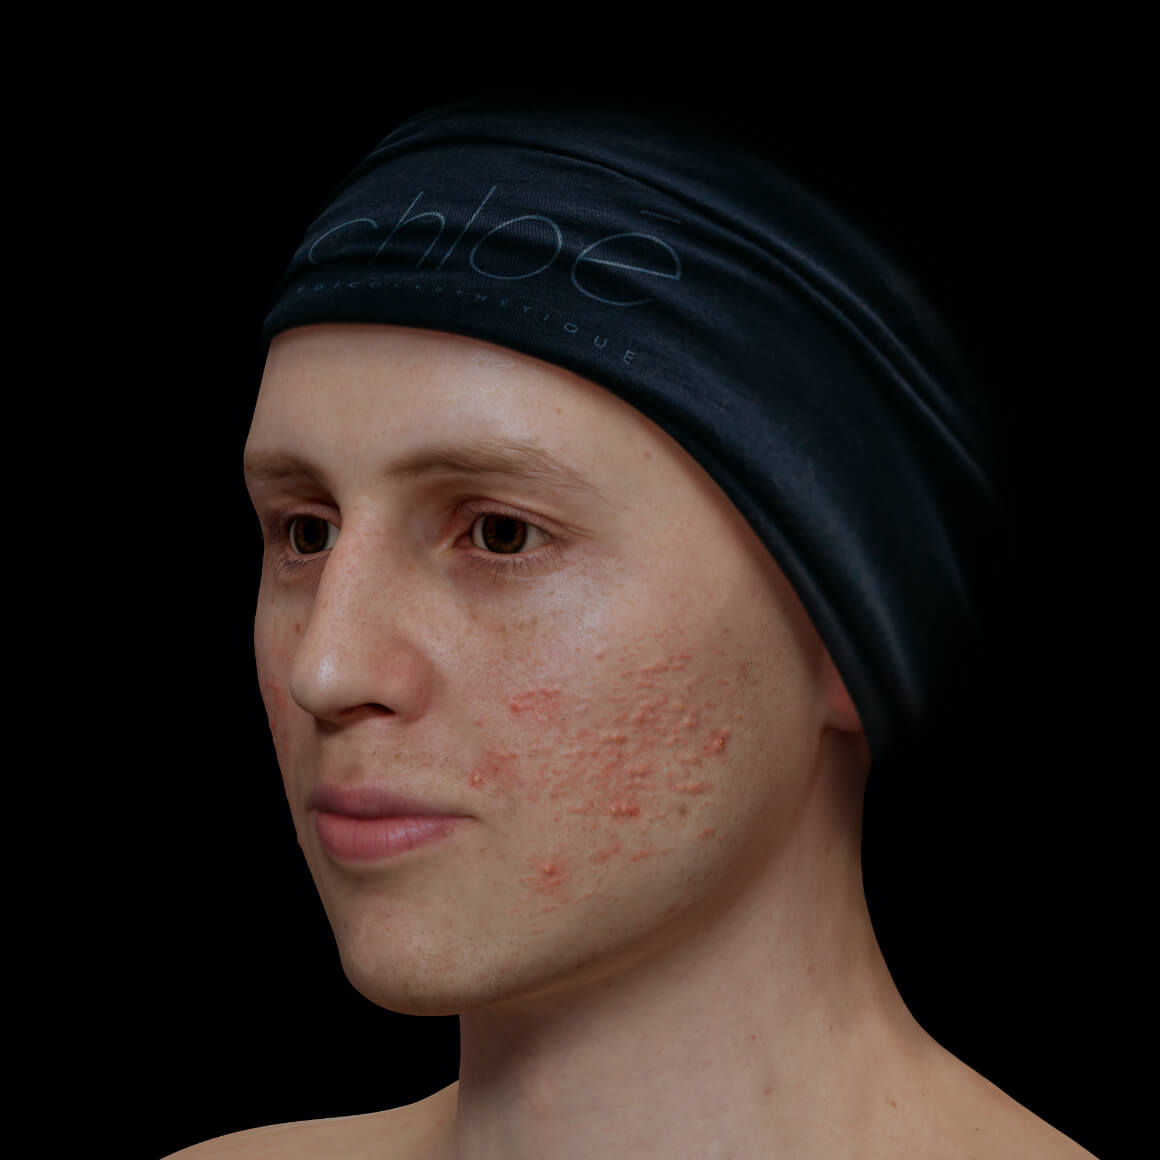 Angled Clinique Chloé male patient with active acne on his face